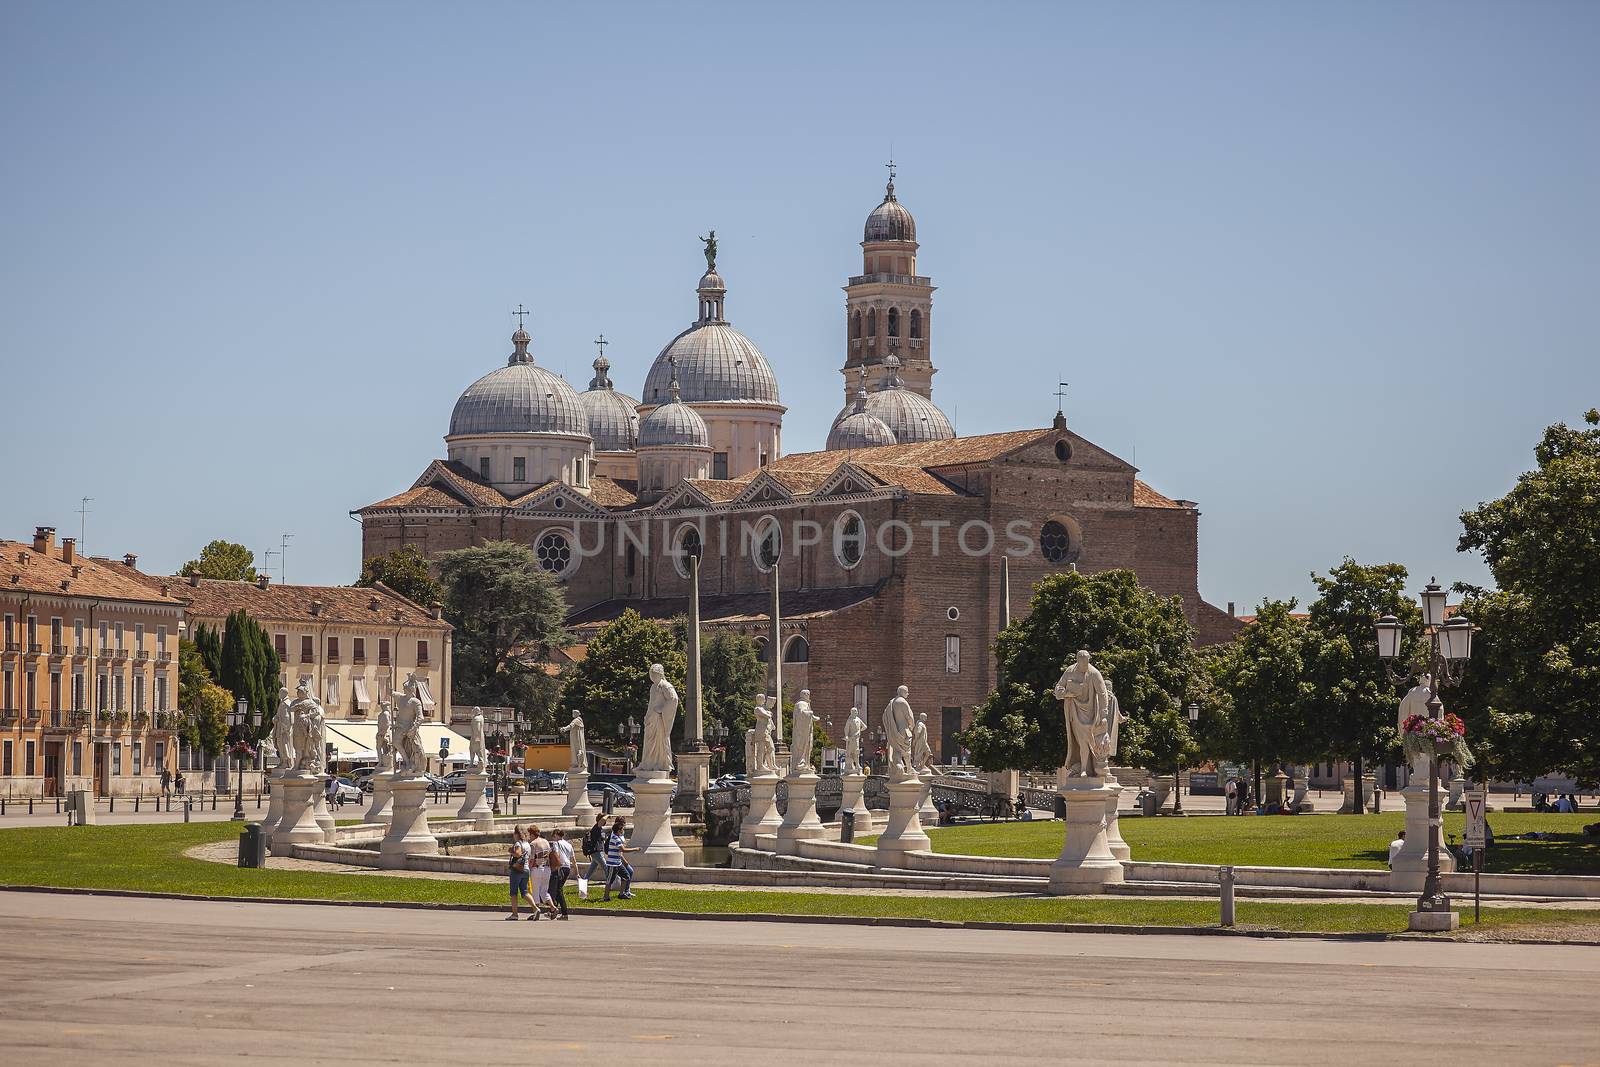 PADOVA, ITALY 17 JULY 2020: View of Santa Giustina Cathedral in Padua in Italy in a sunny day